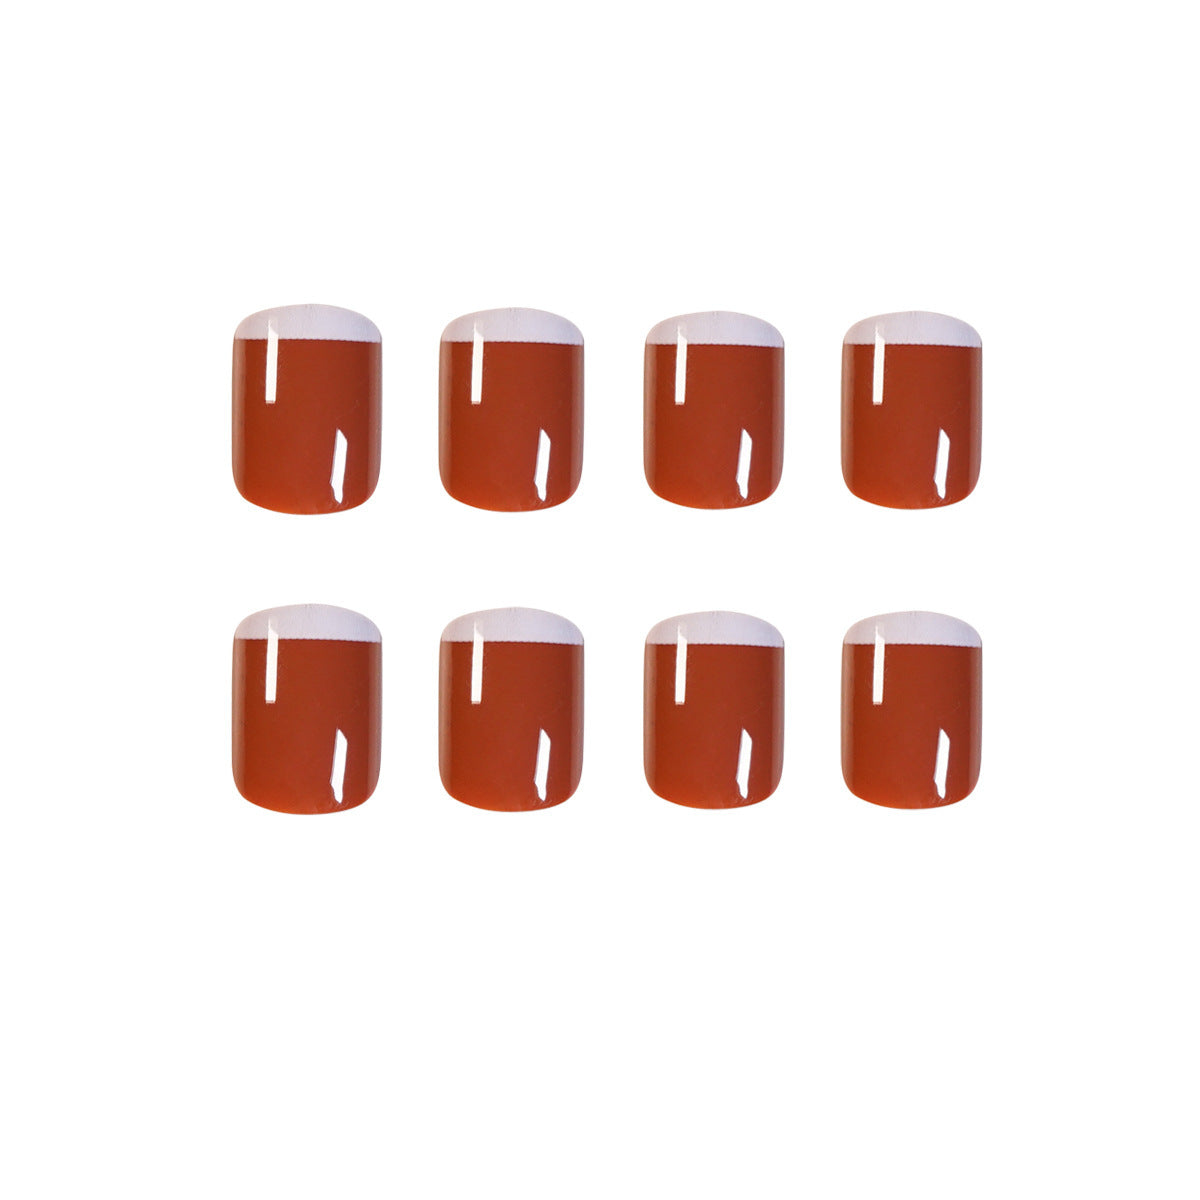 Nail manicure pieces, removable French fake nails, wearable nail pieces, manicure nail patches